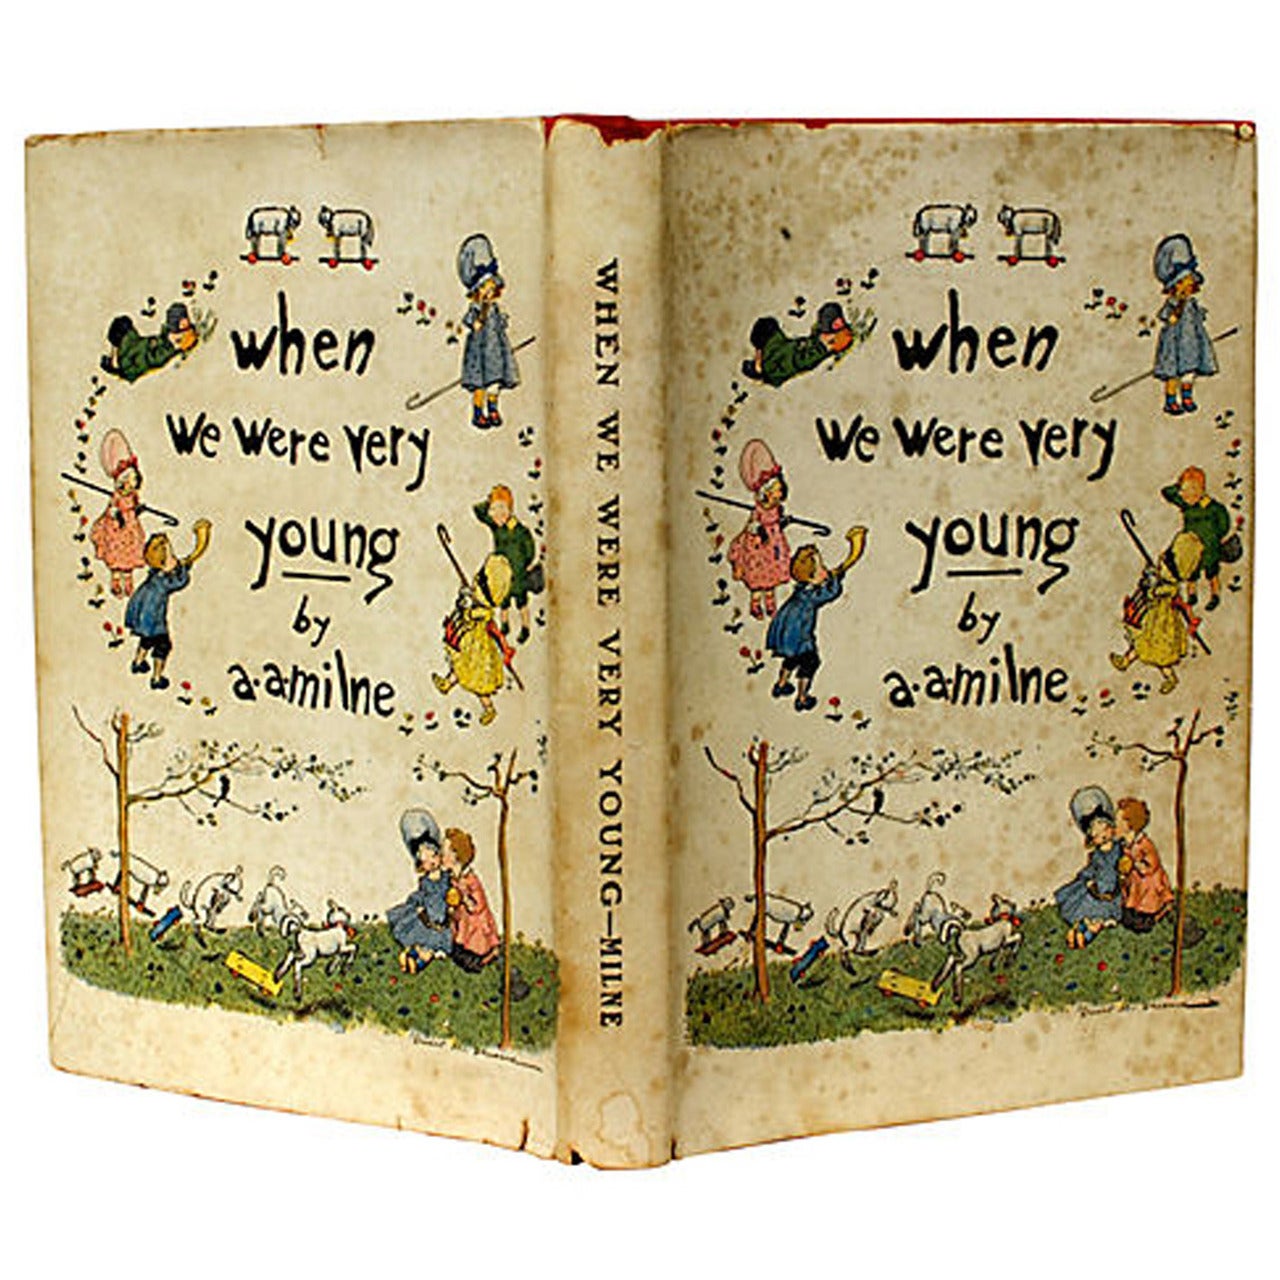 "When We Were Very Young" by A. A. Milne